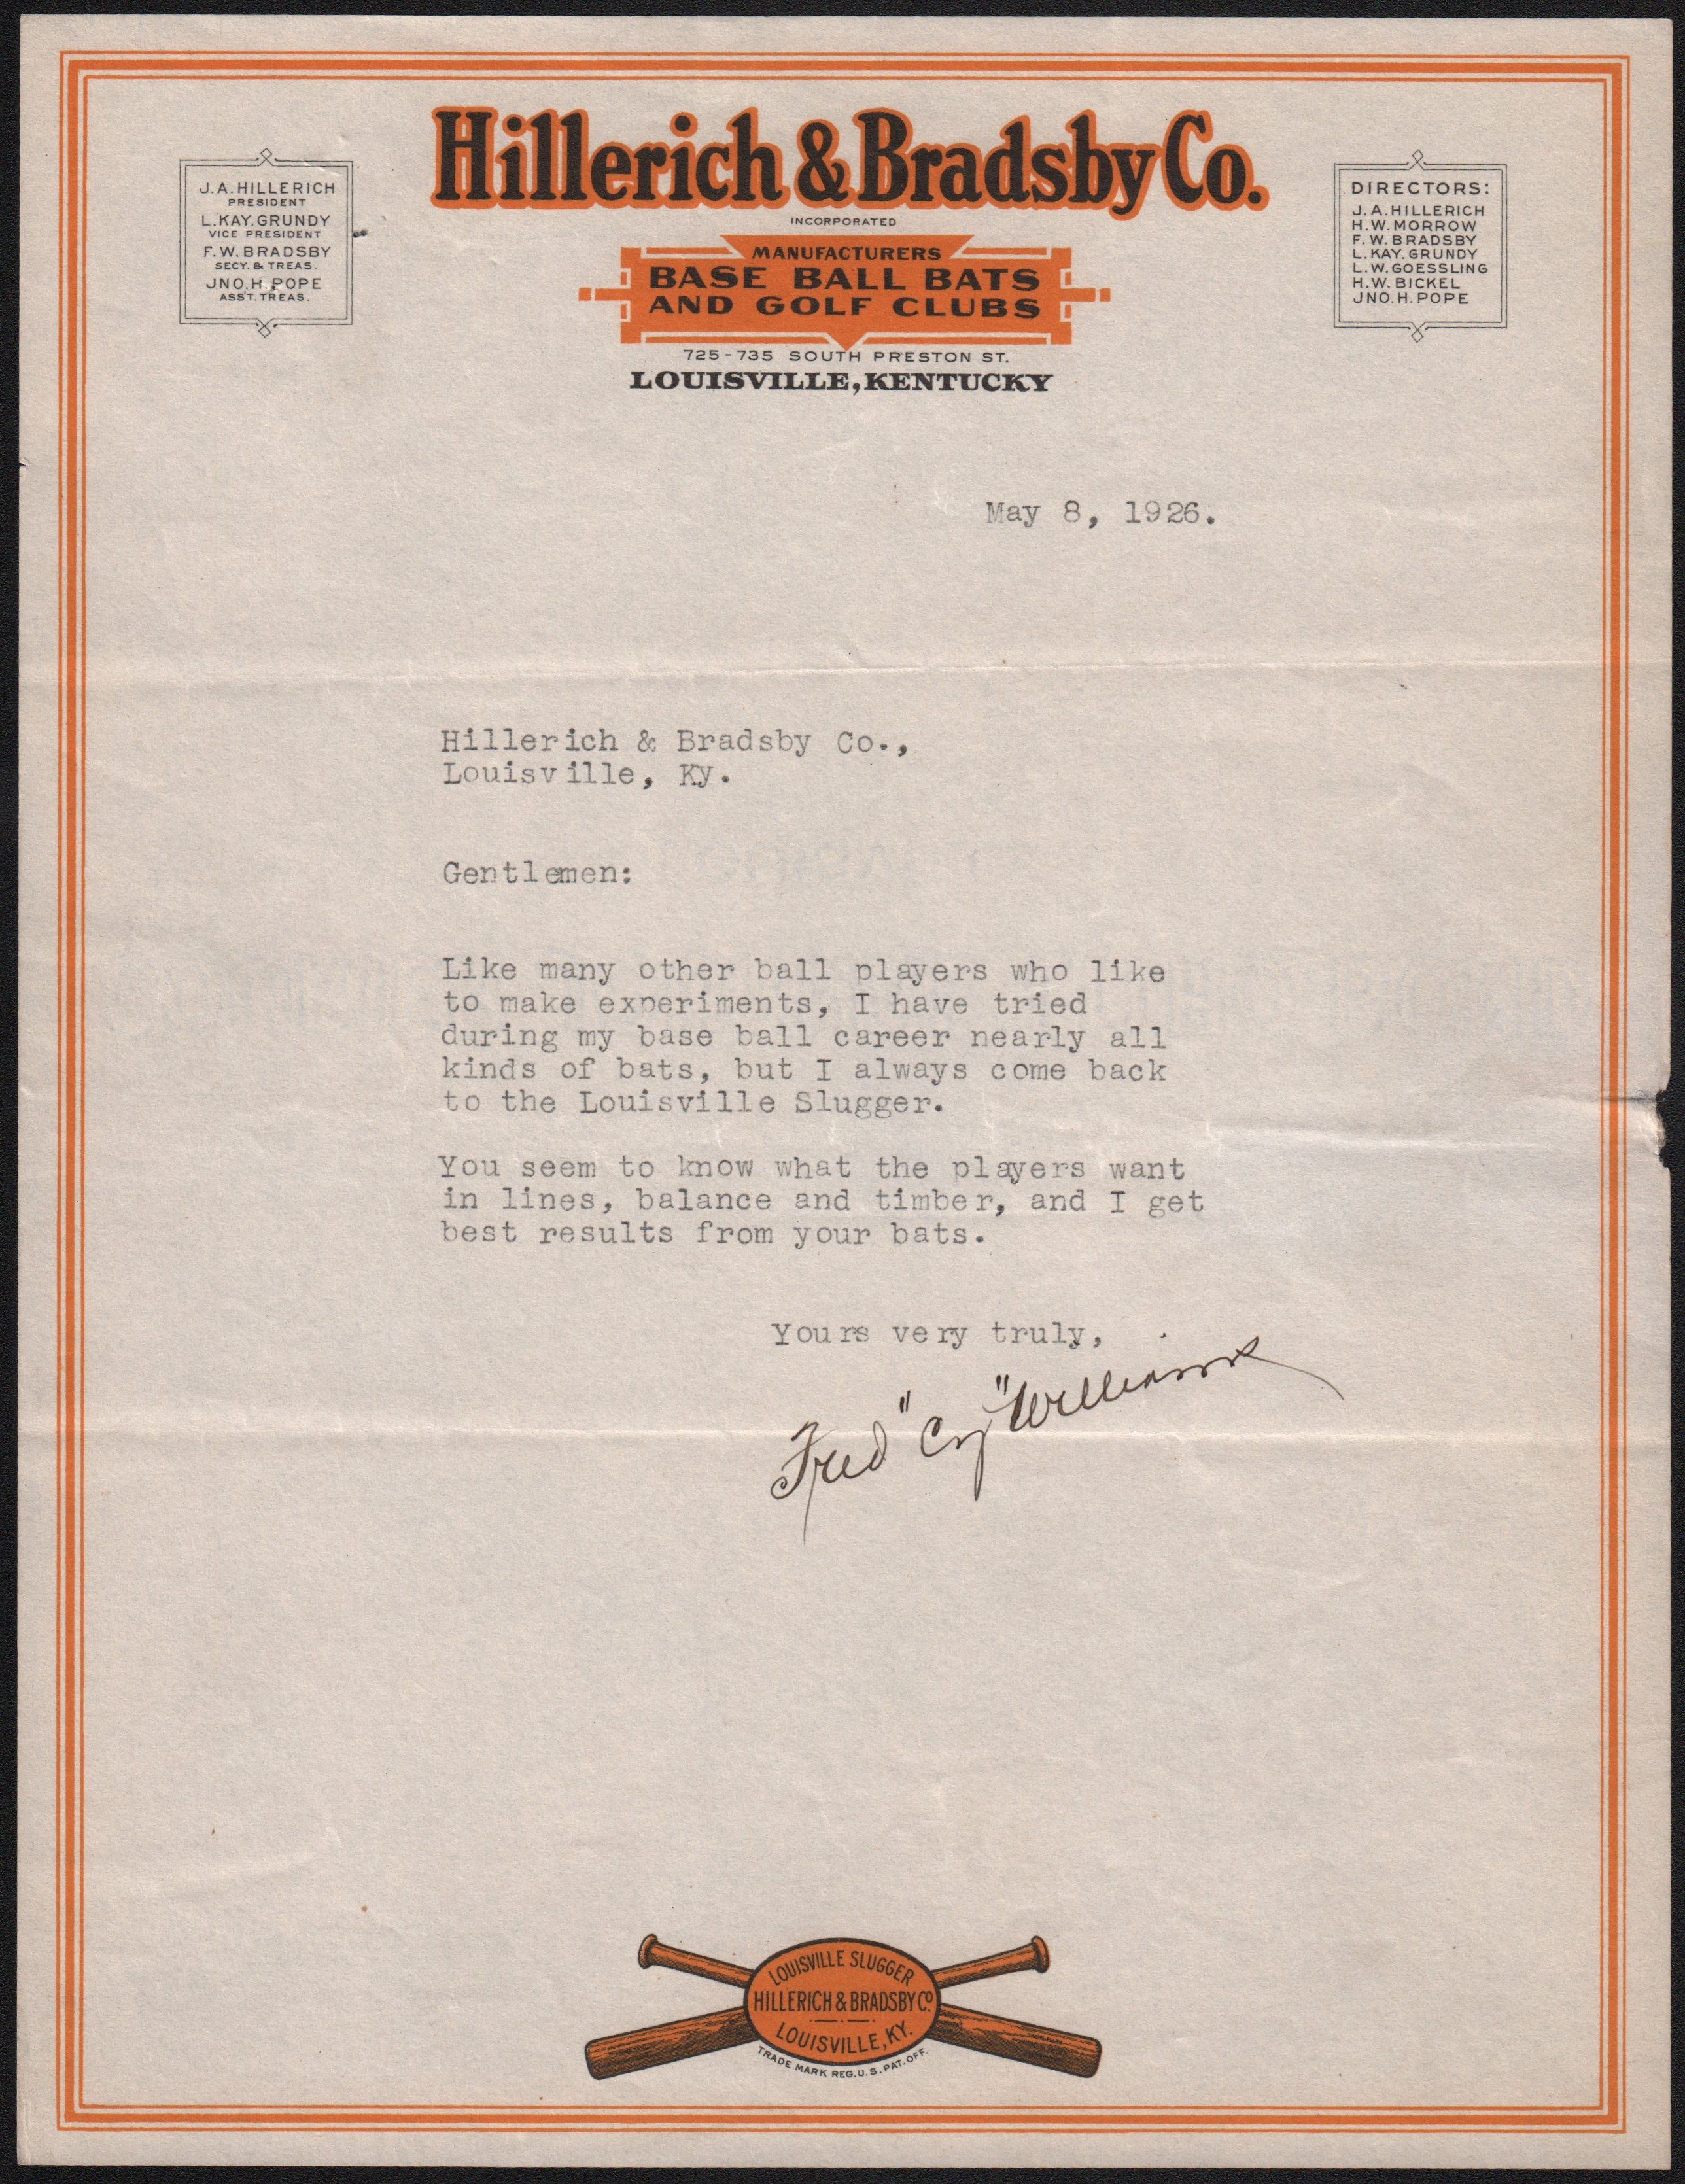 - 1926 Fred Cy Williams Hillerich & Bradsby Letter Endorsing Bats